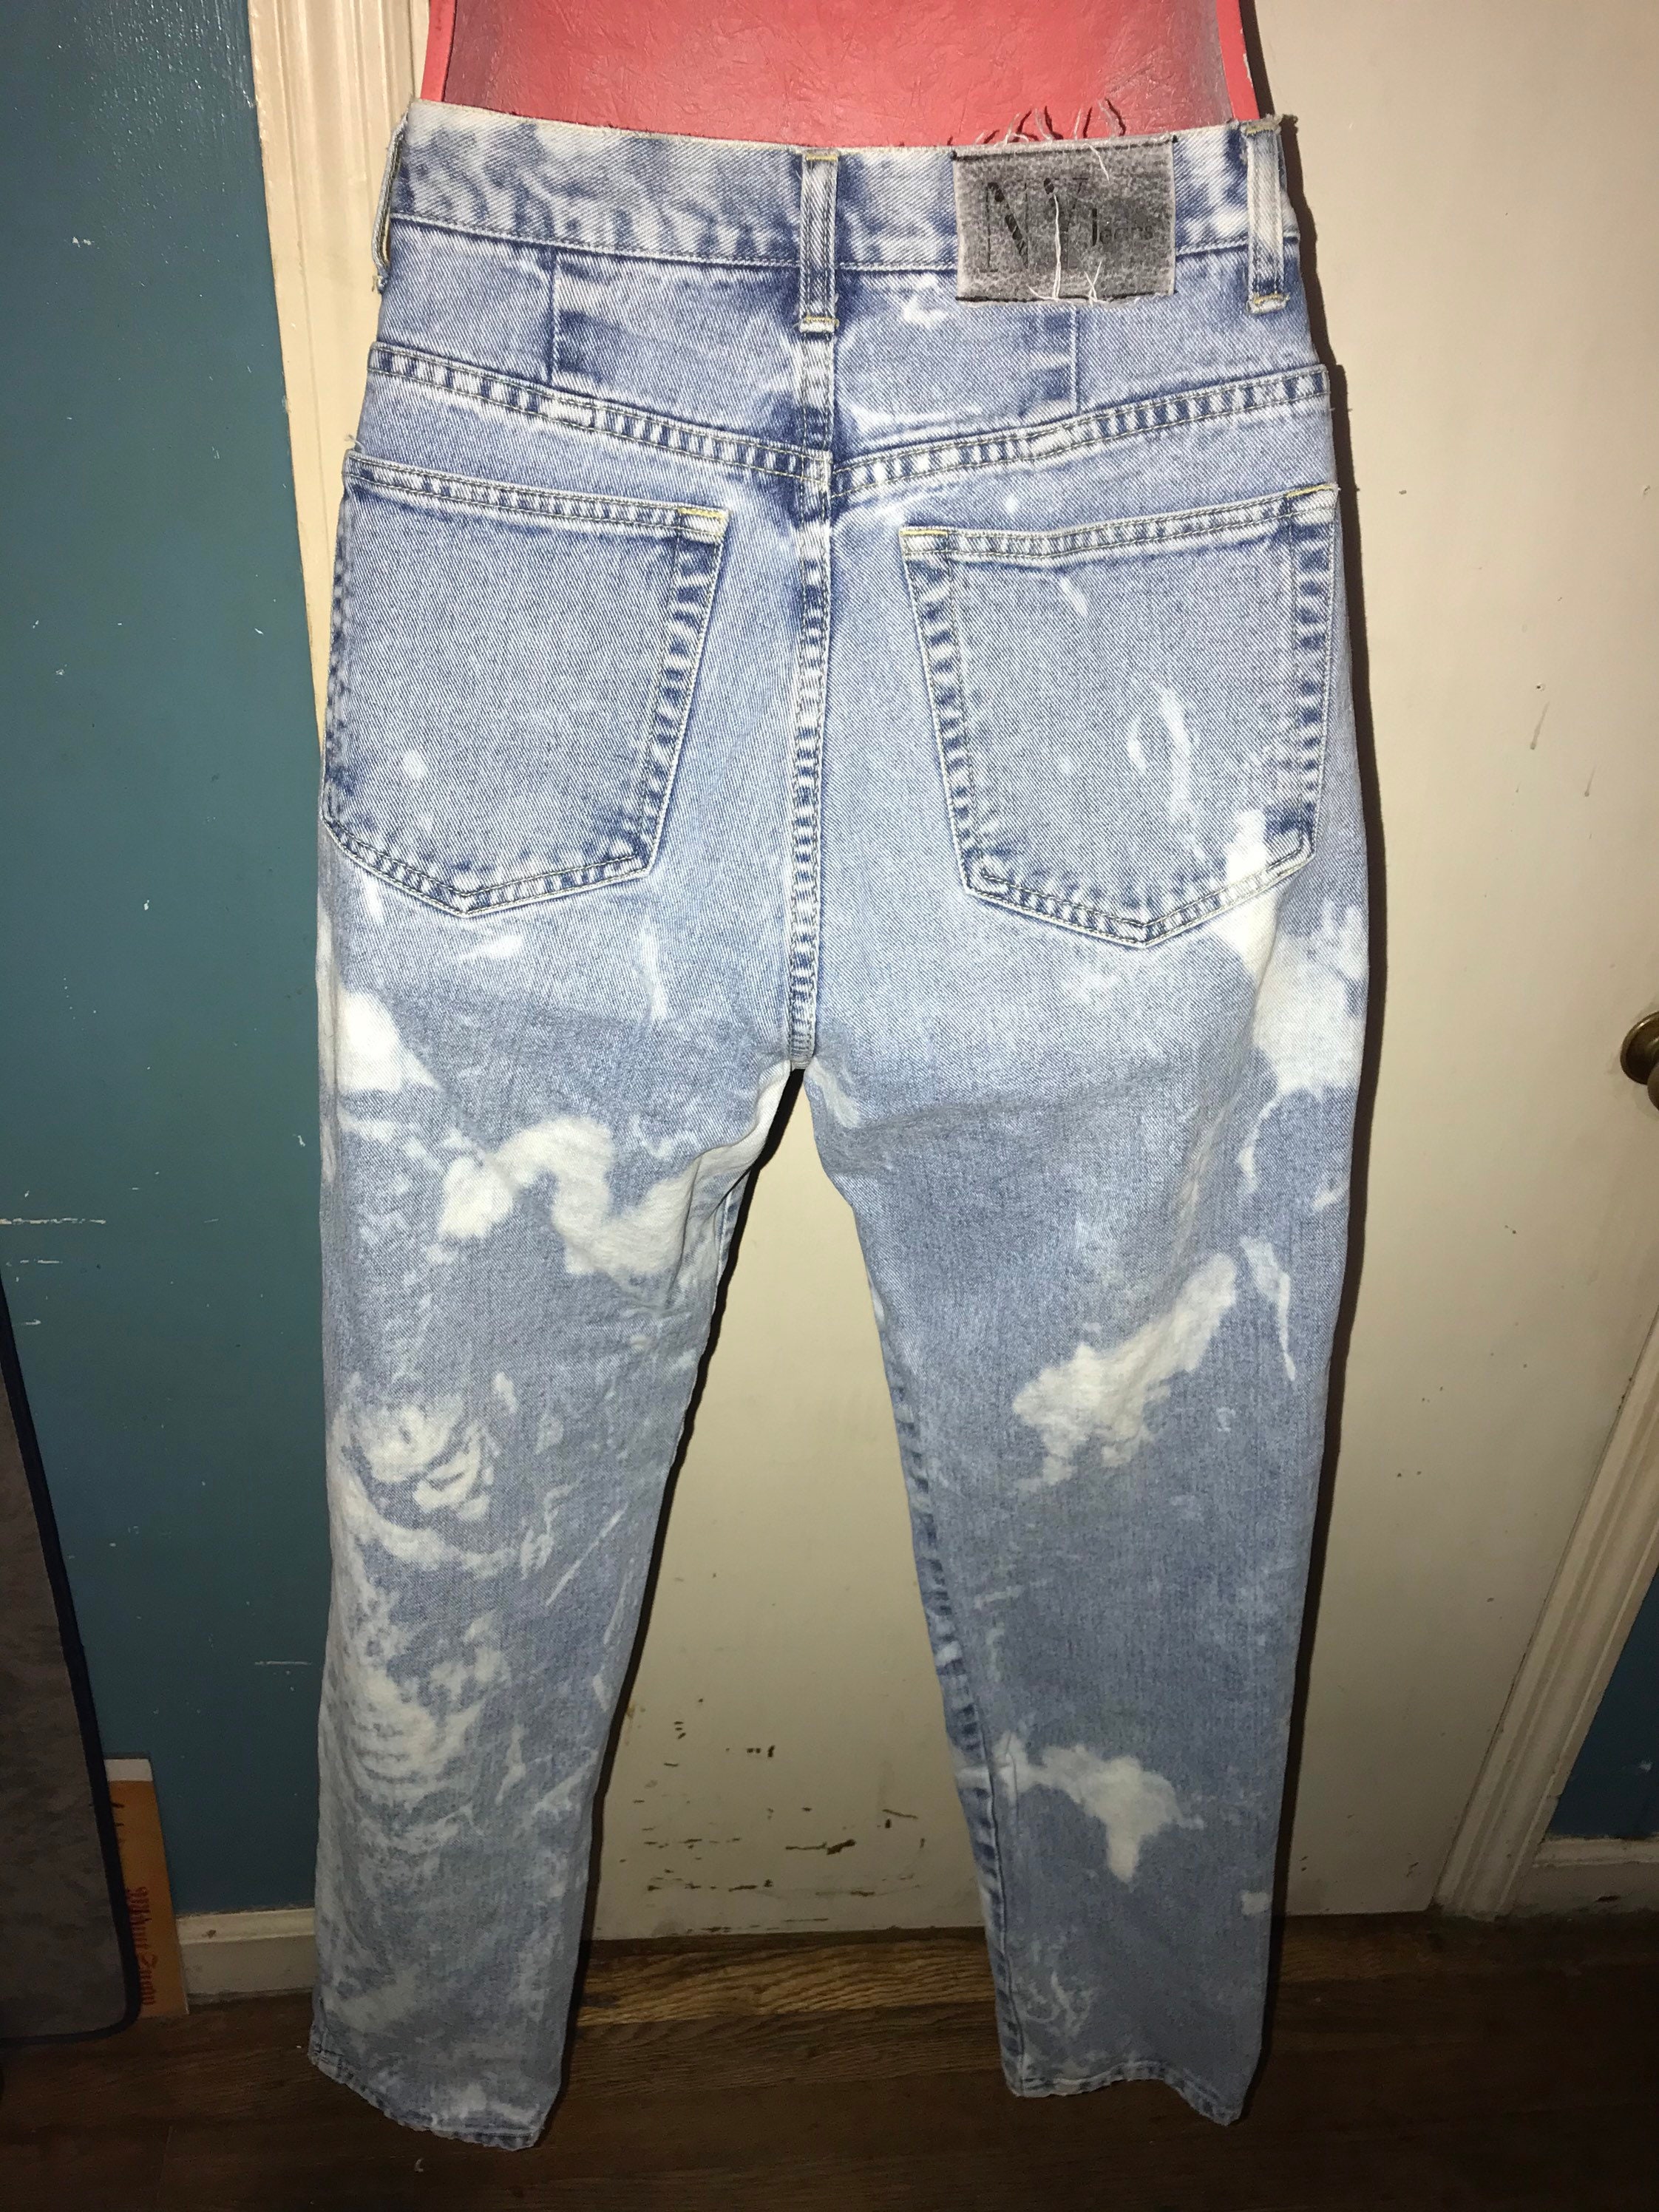 Vintage 90s Bleached Jeans. Excellent Bleached Out Distressed | Etsy